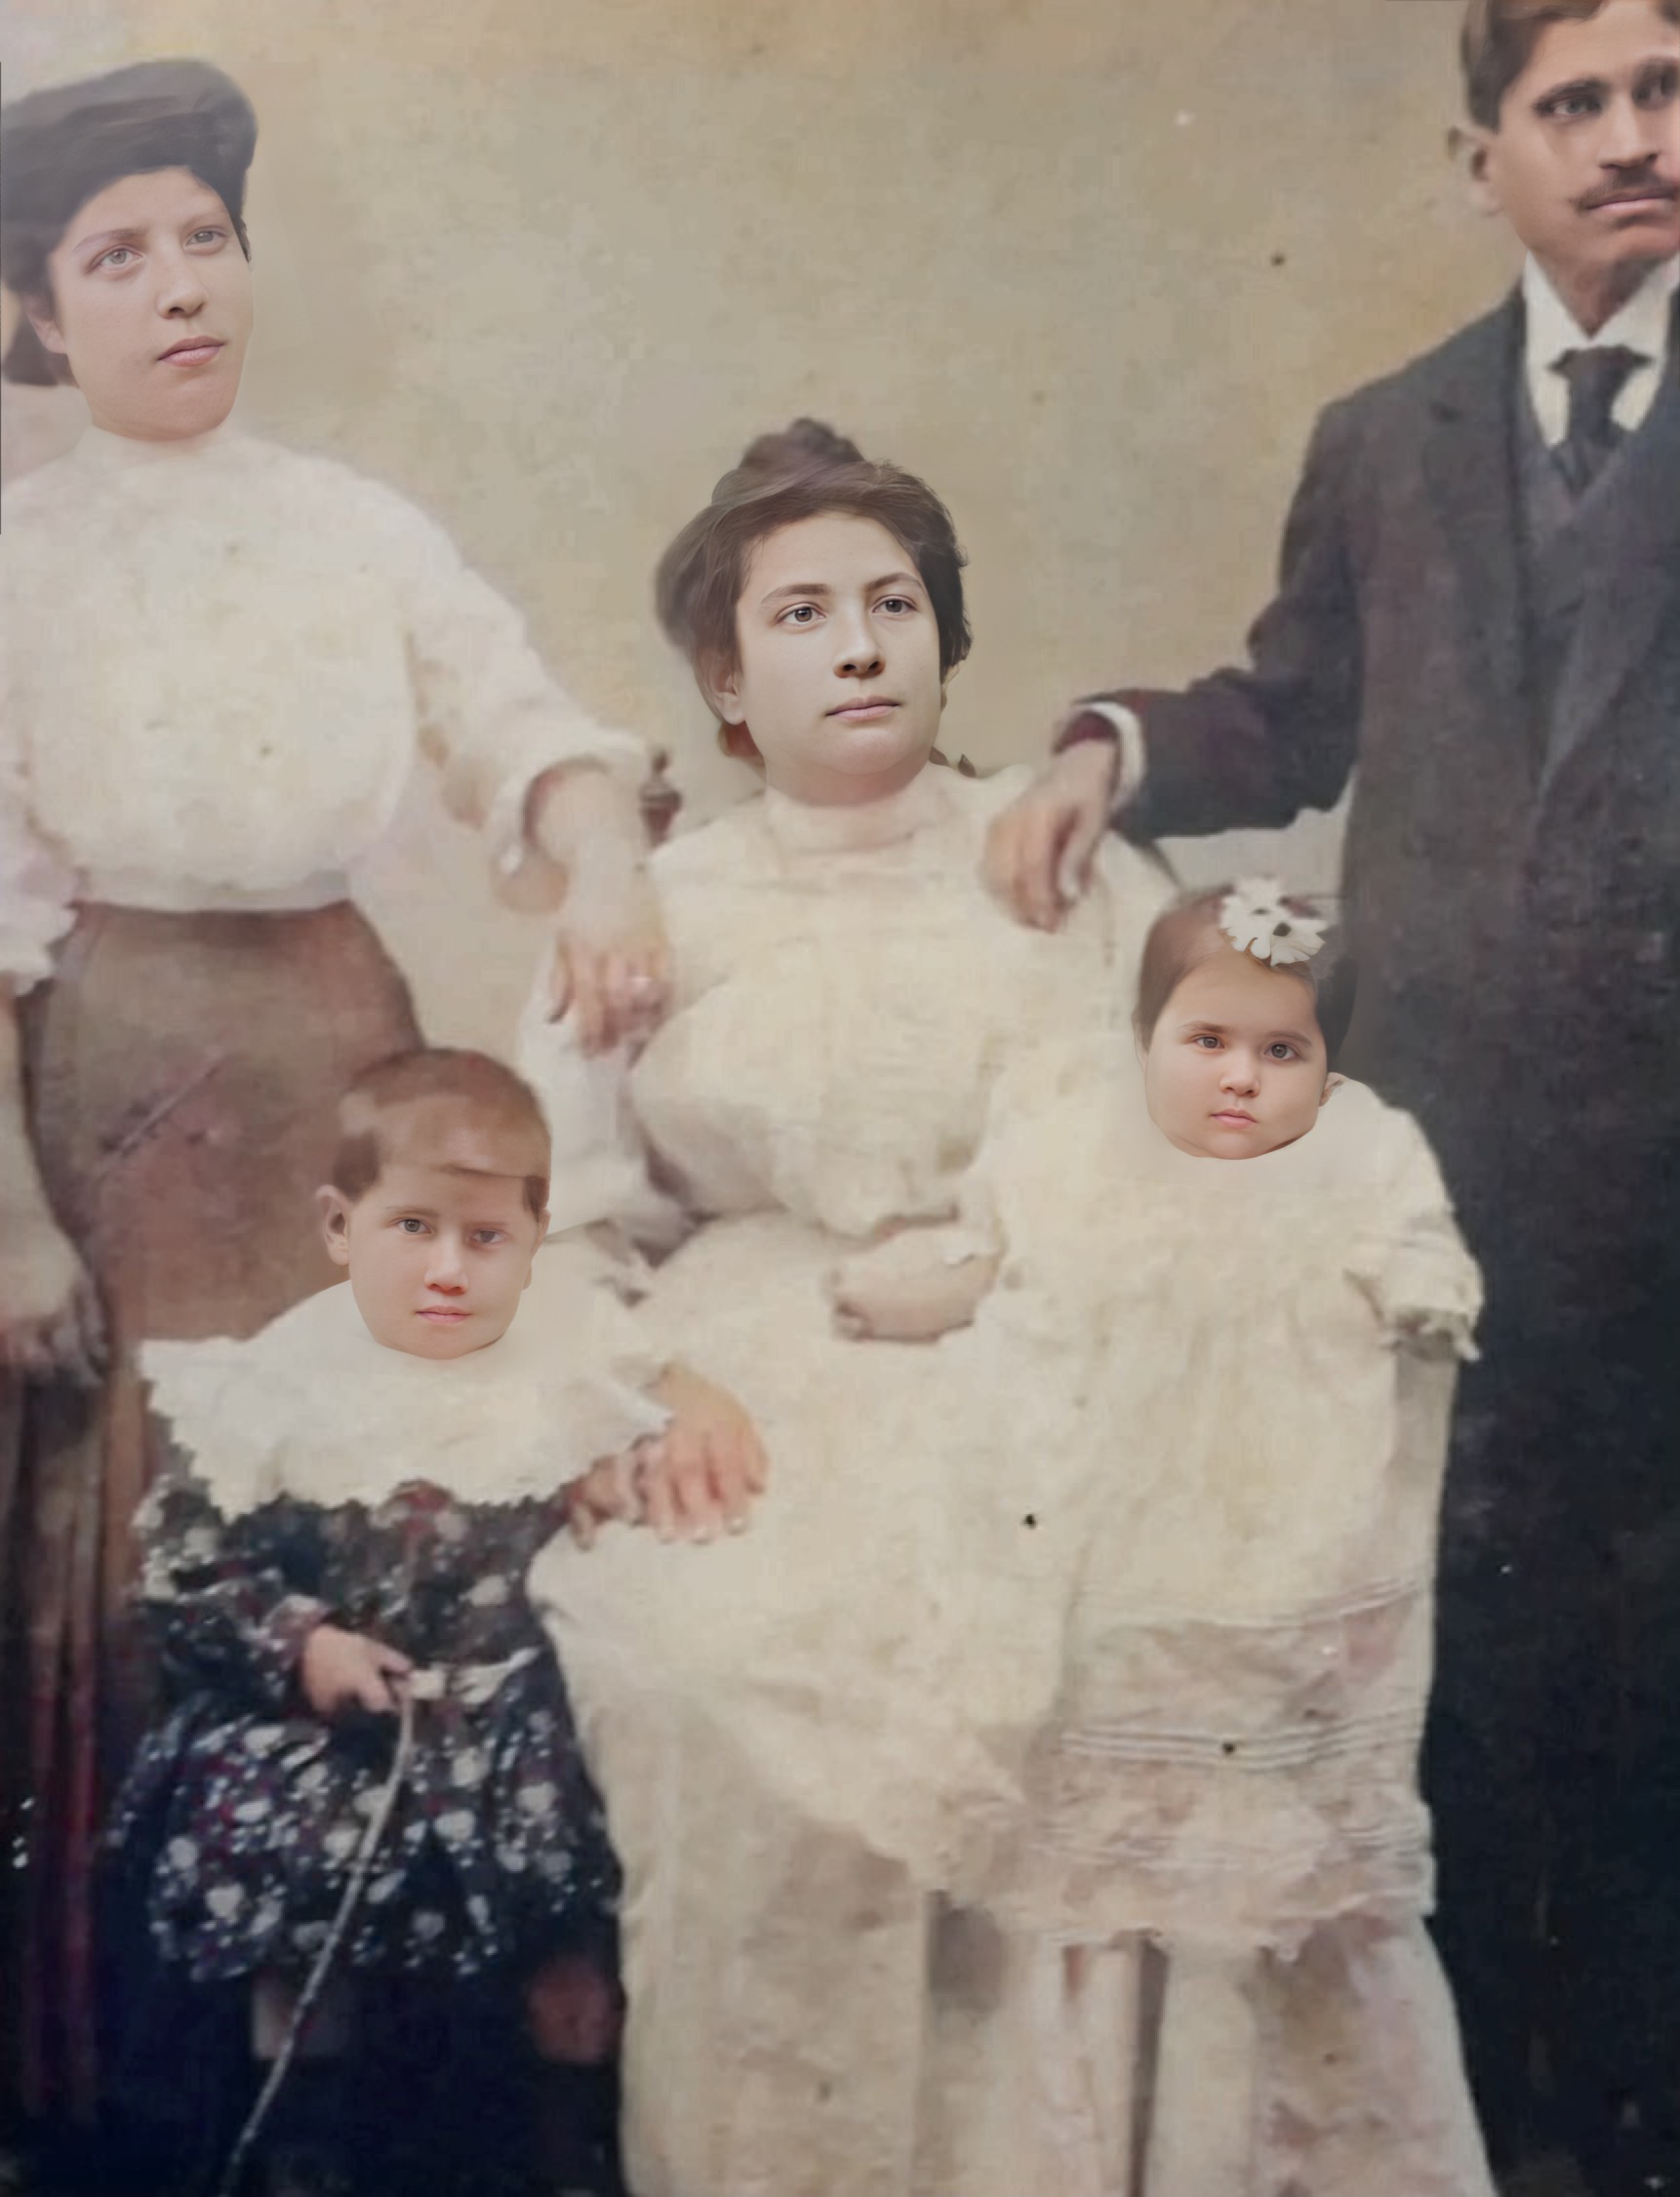 This is photi from begining of 1920 of a grandmother of one of my friends qith her parents in Mexico